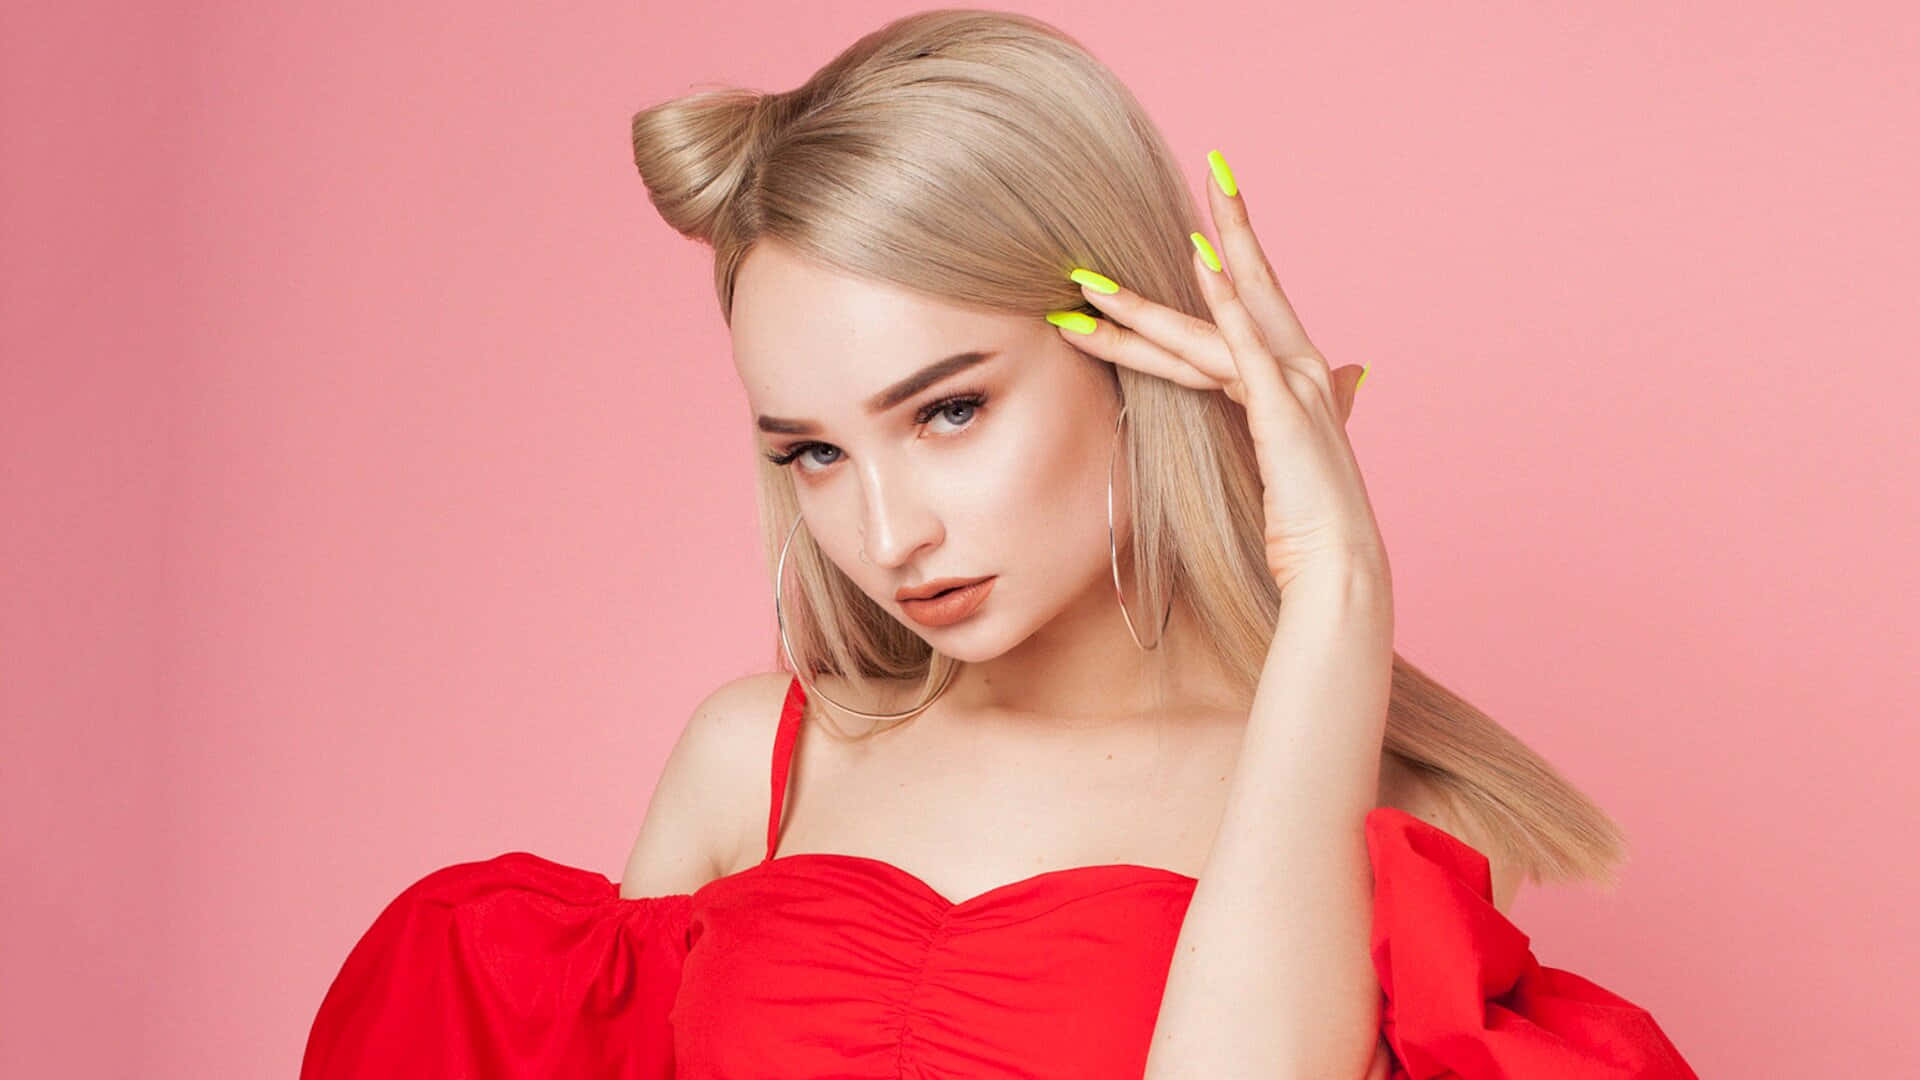 Kim Petras Posing In A Stylishly Edgy Outfit Wallpaper